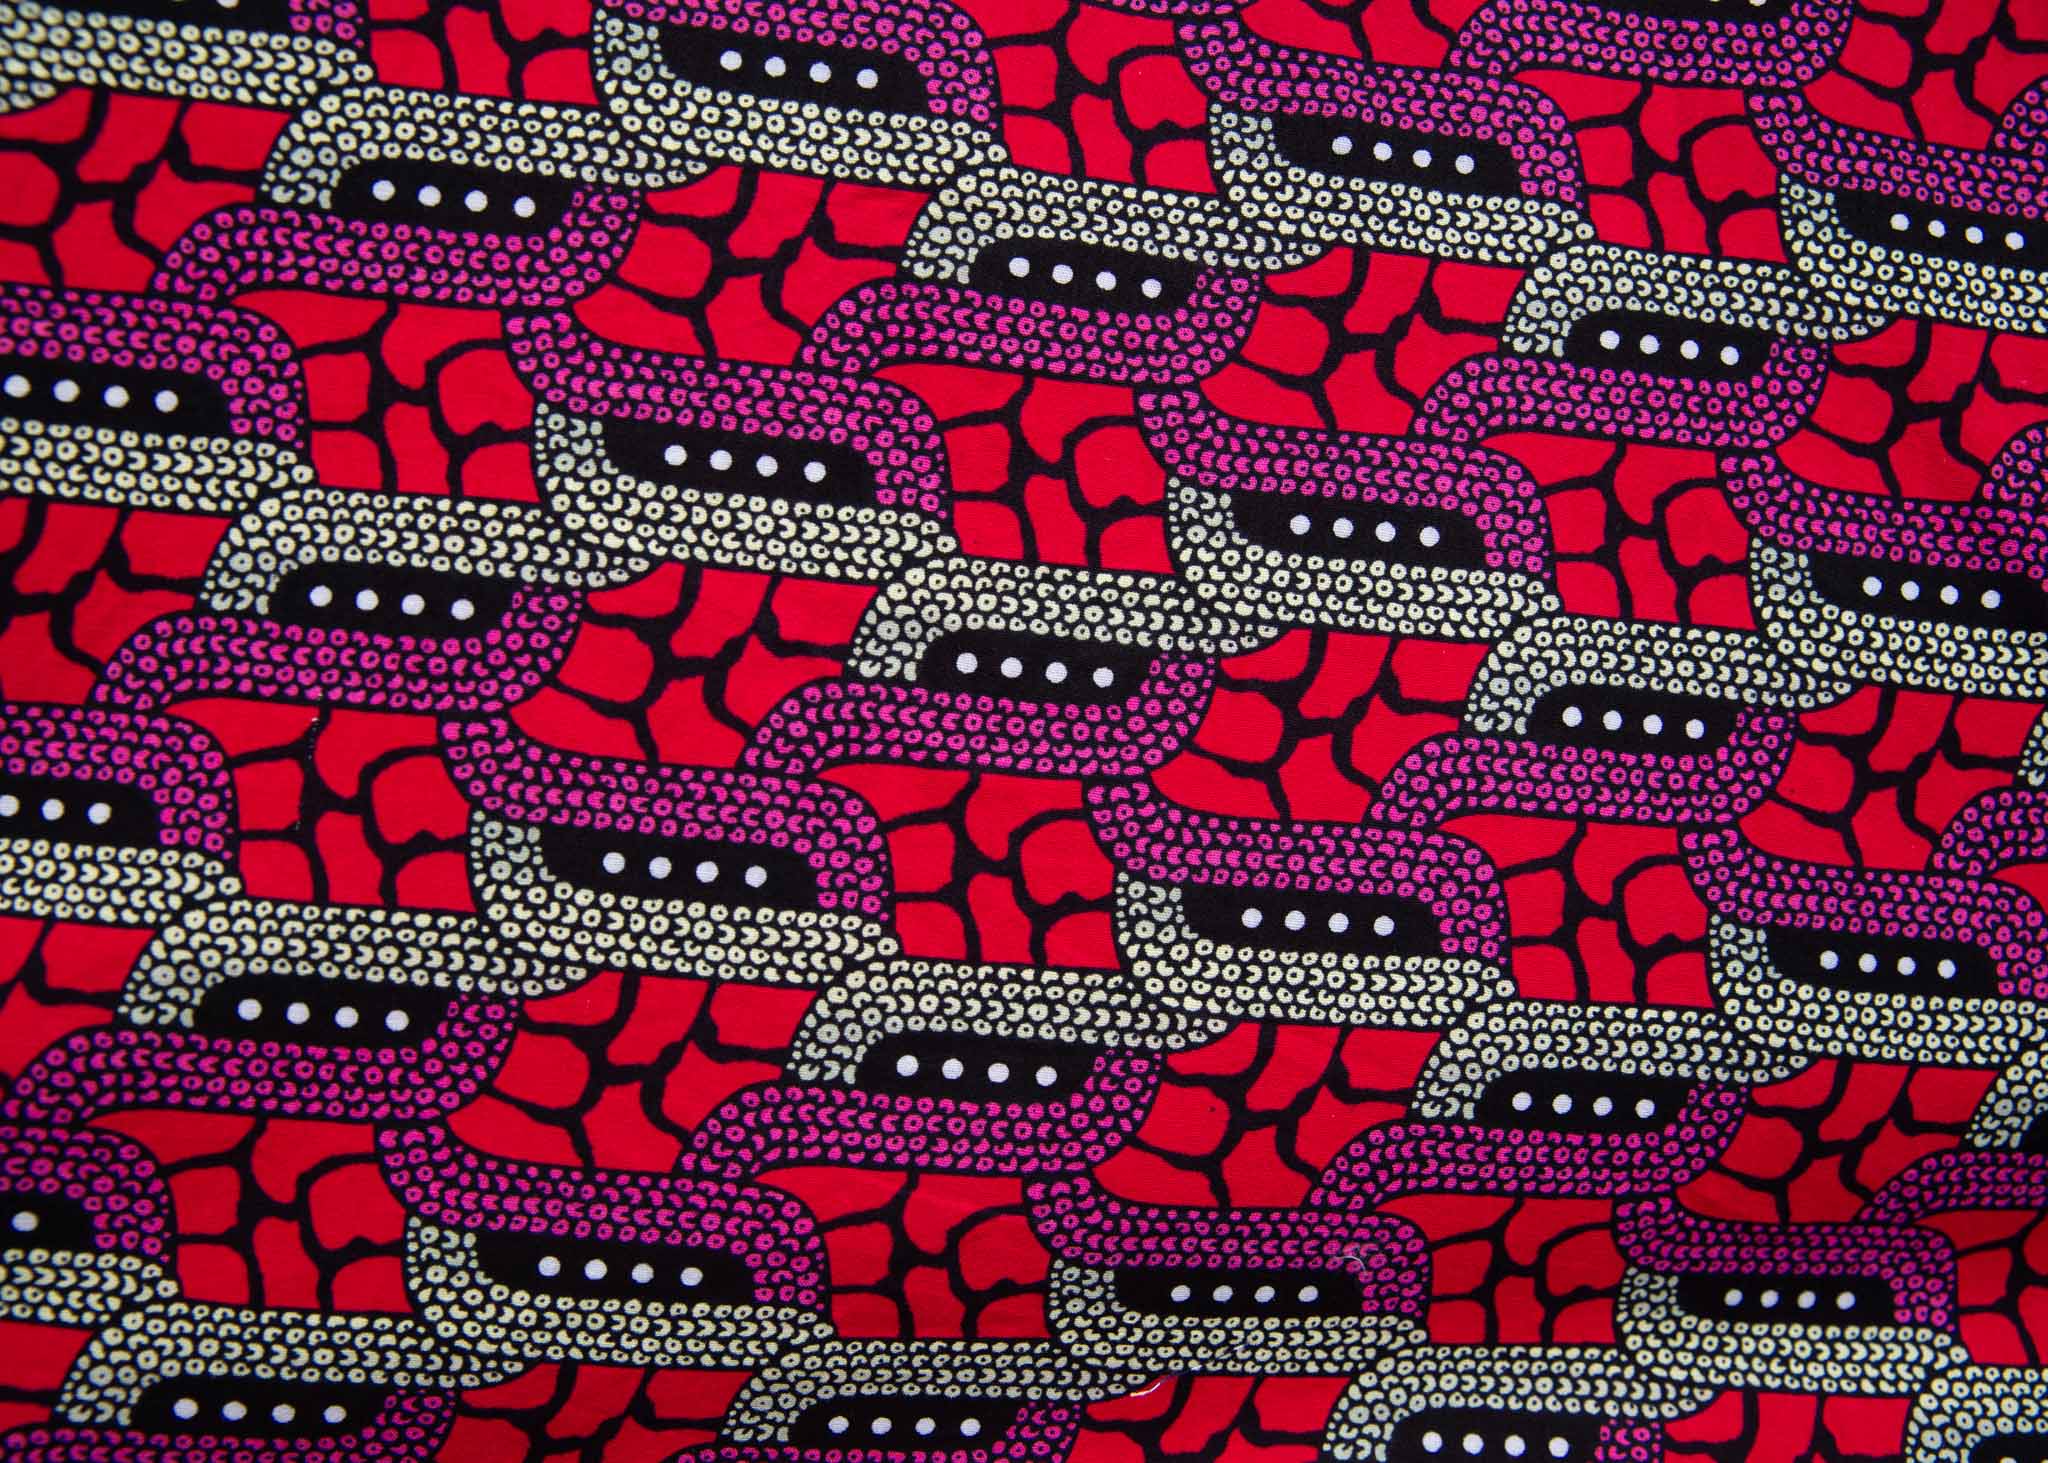 Close up display of red and pink geometric print dress, fabric.